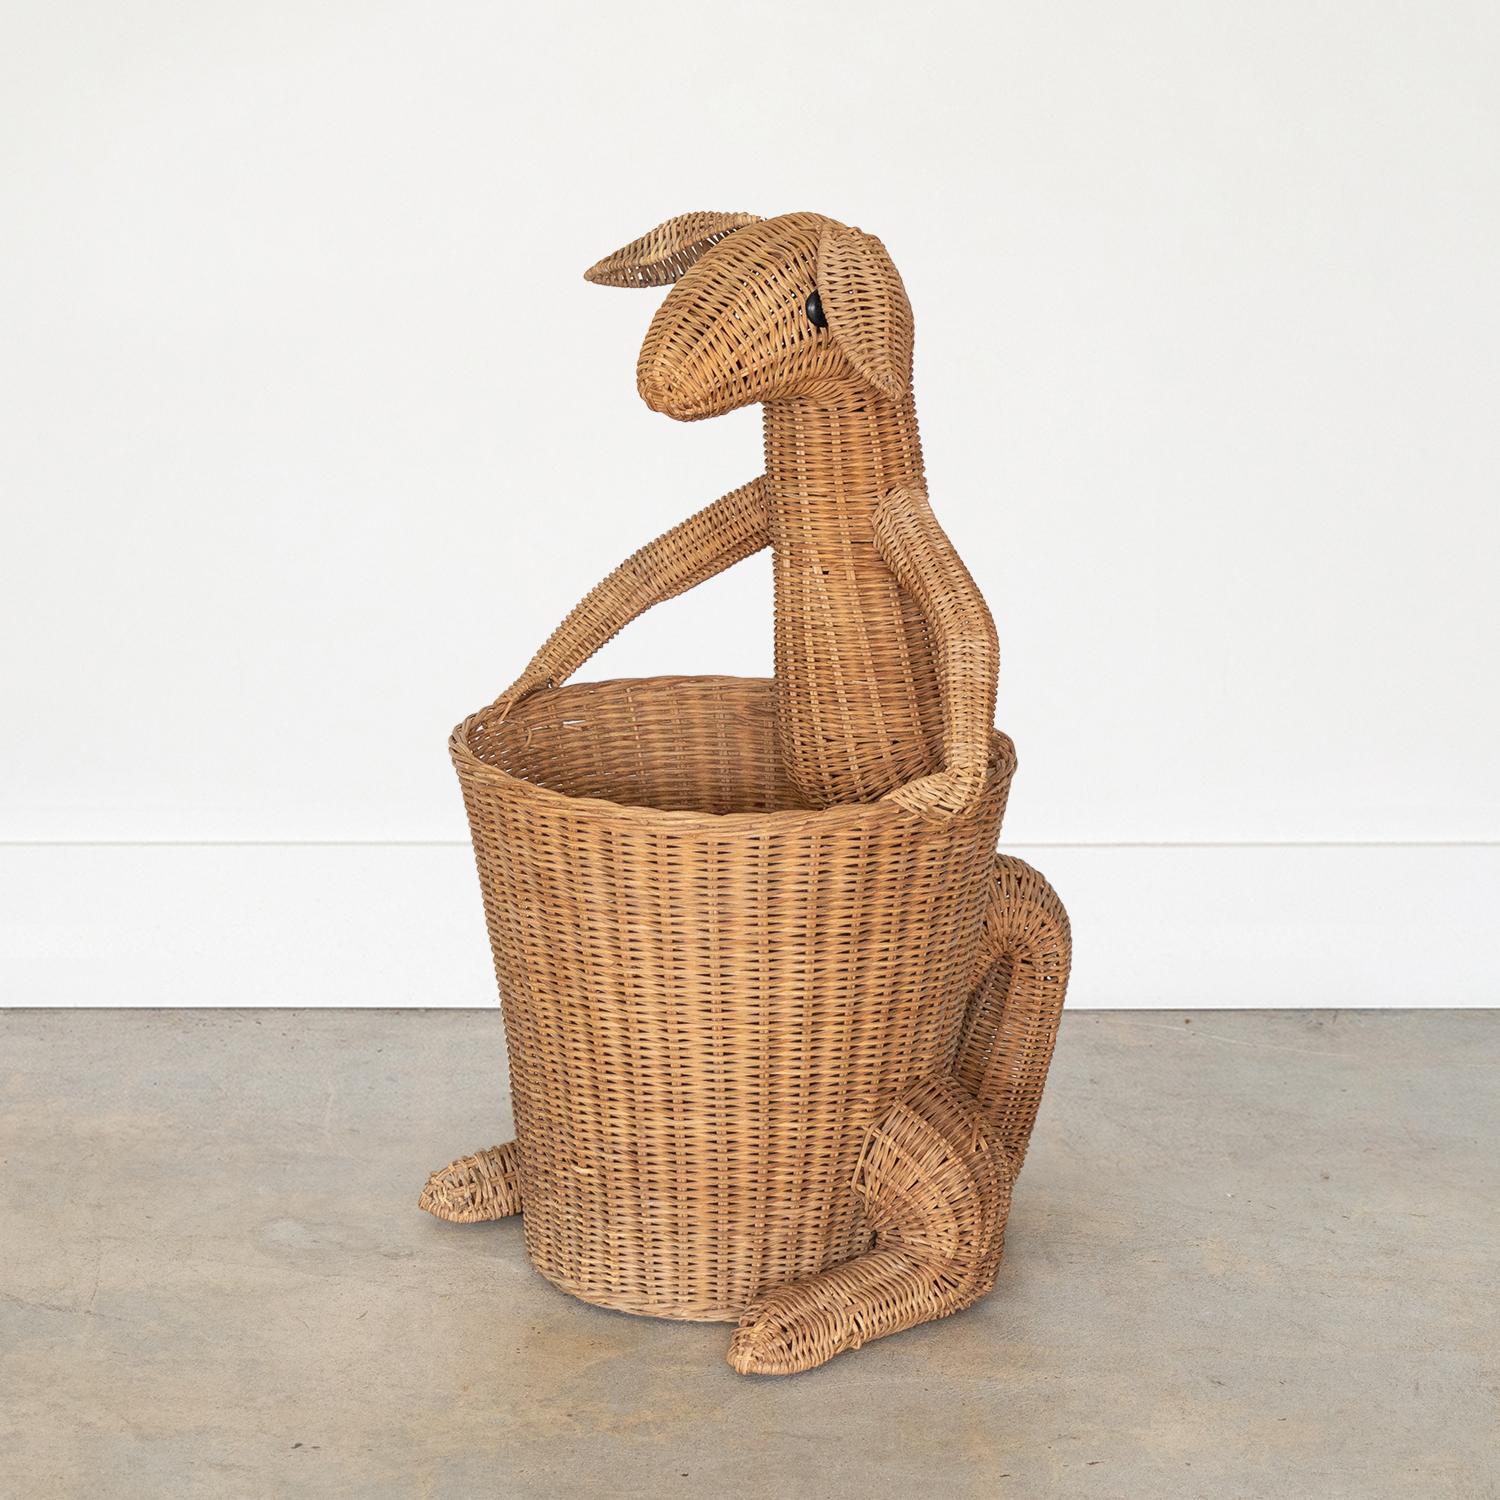 Playful vintage French wicker decorative basket in the shape of a kangaroo and in the style of Mario Torres. Cute woven wicker curled tail, floppy ears and black button eyes. Large open basket perfect to hold toys, magazines, or a plant.